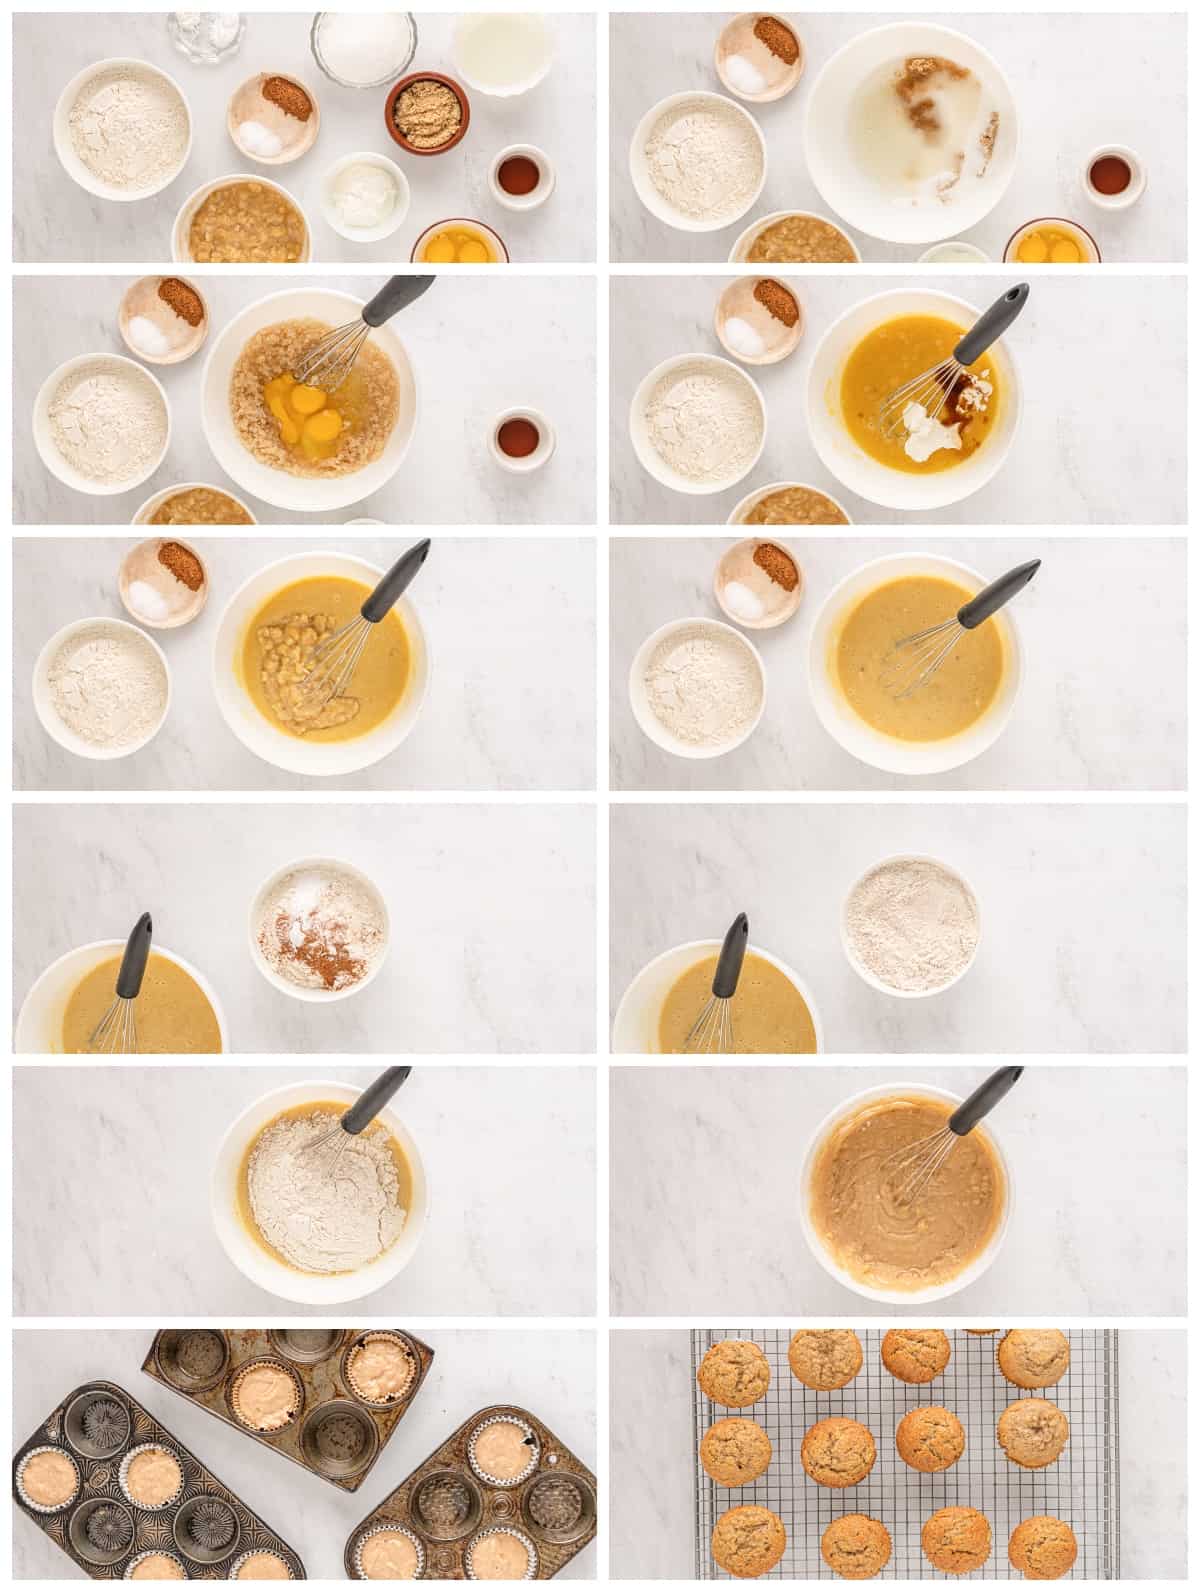 how to make banana muffins with 2 bananas step by step photo instructions